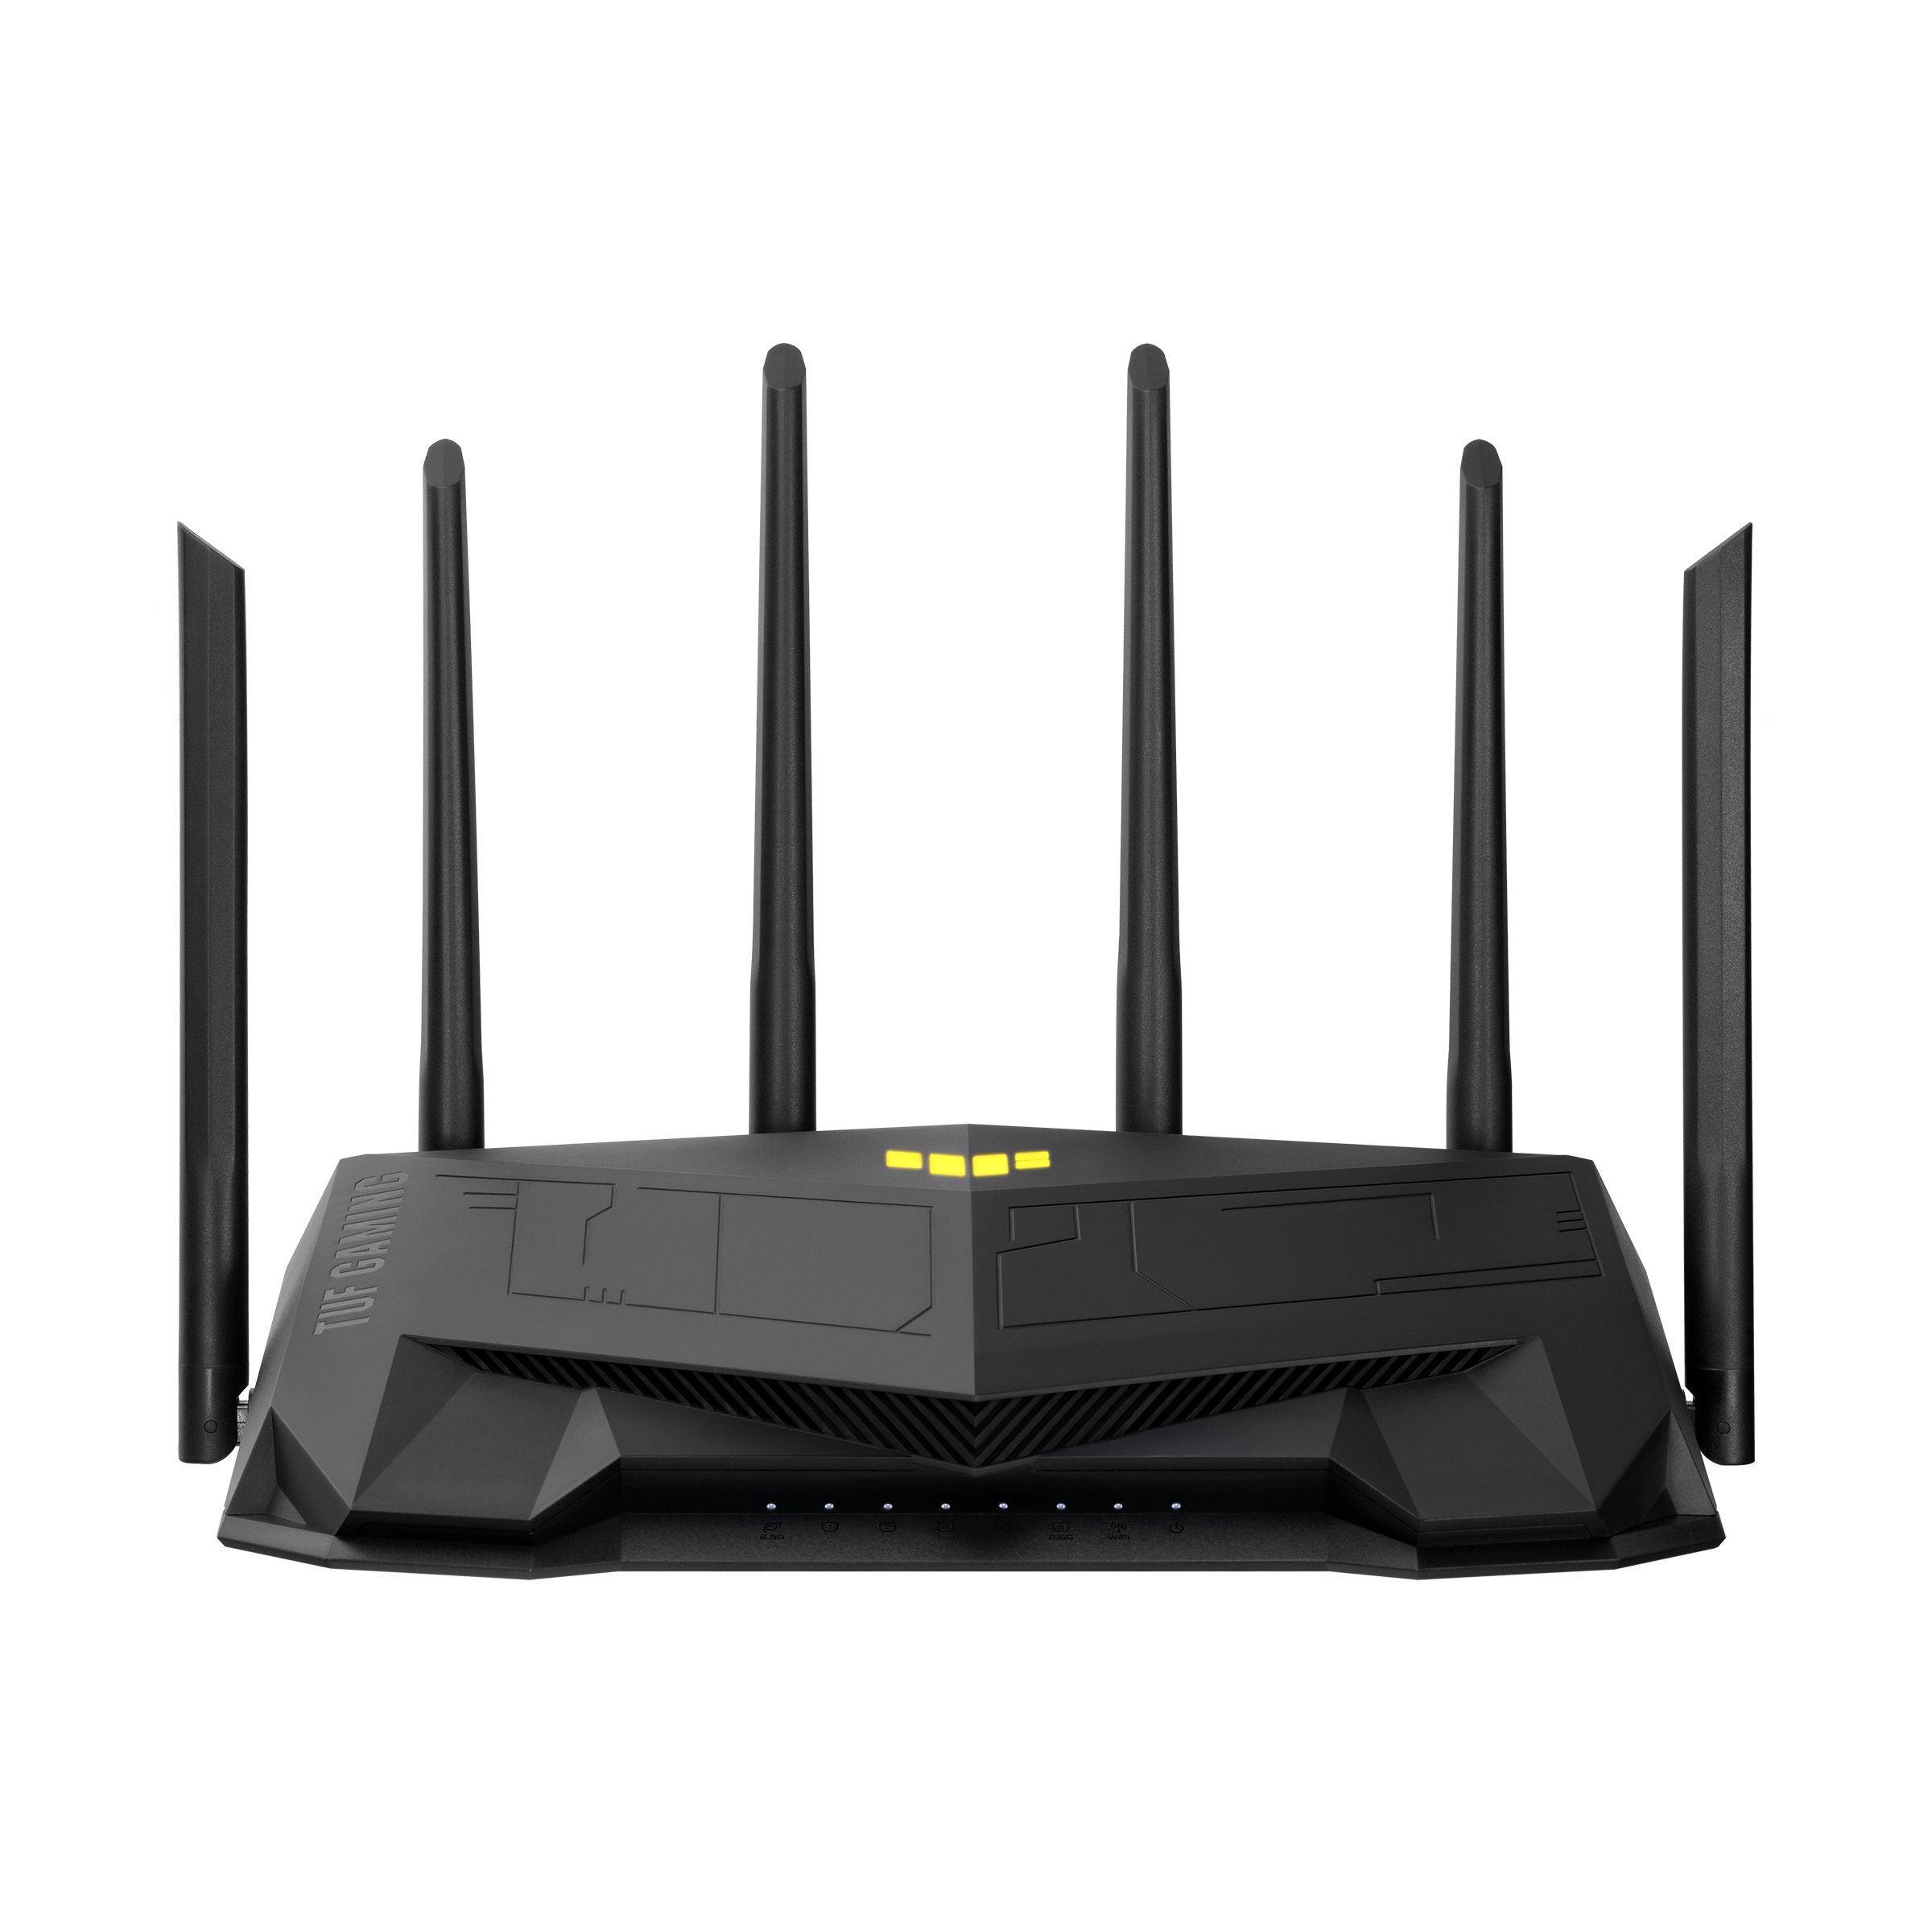 TUF Gaming AX6000｜WiFi Routers｜ASUS Global